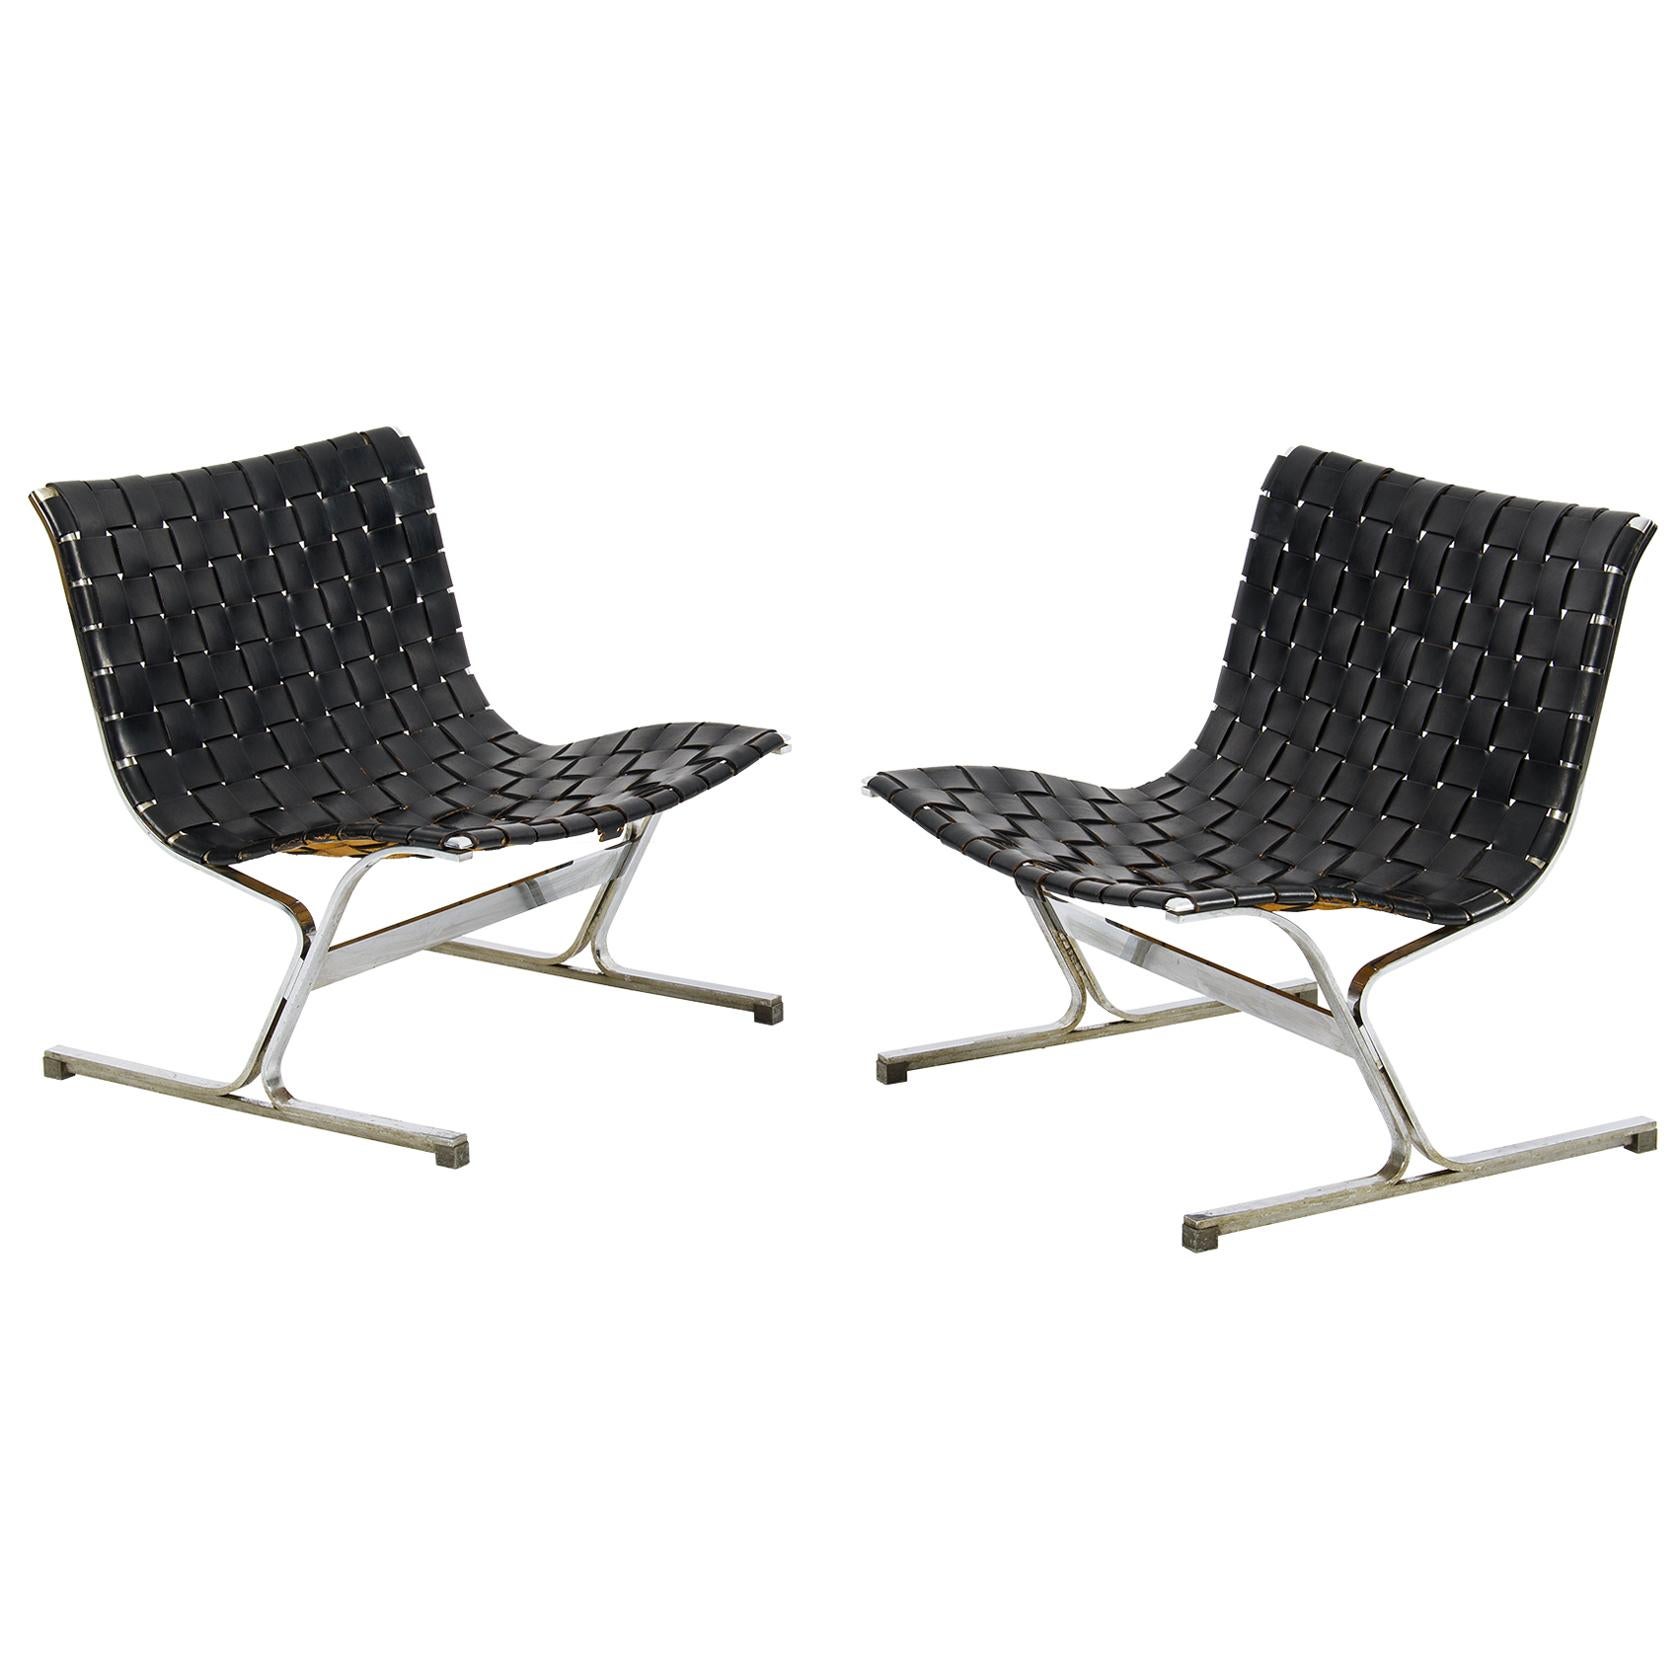 Pair of Black Leathear Lounge Chairs Designed by Ross Littel